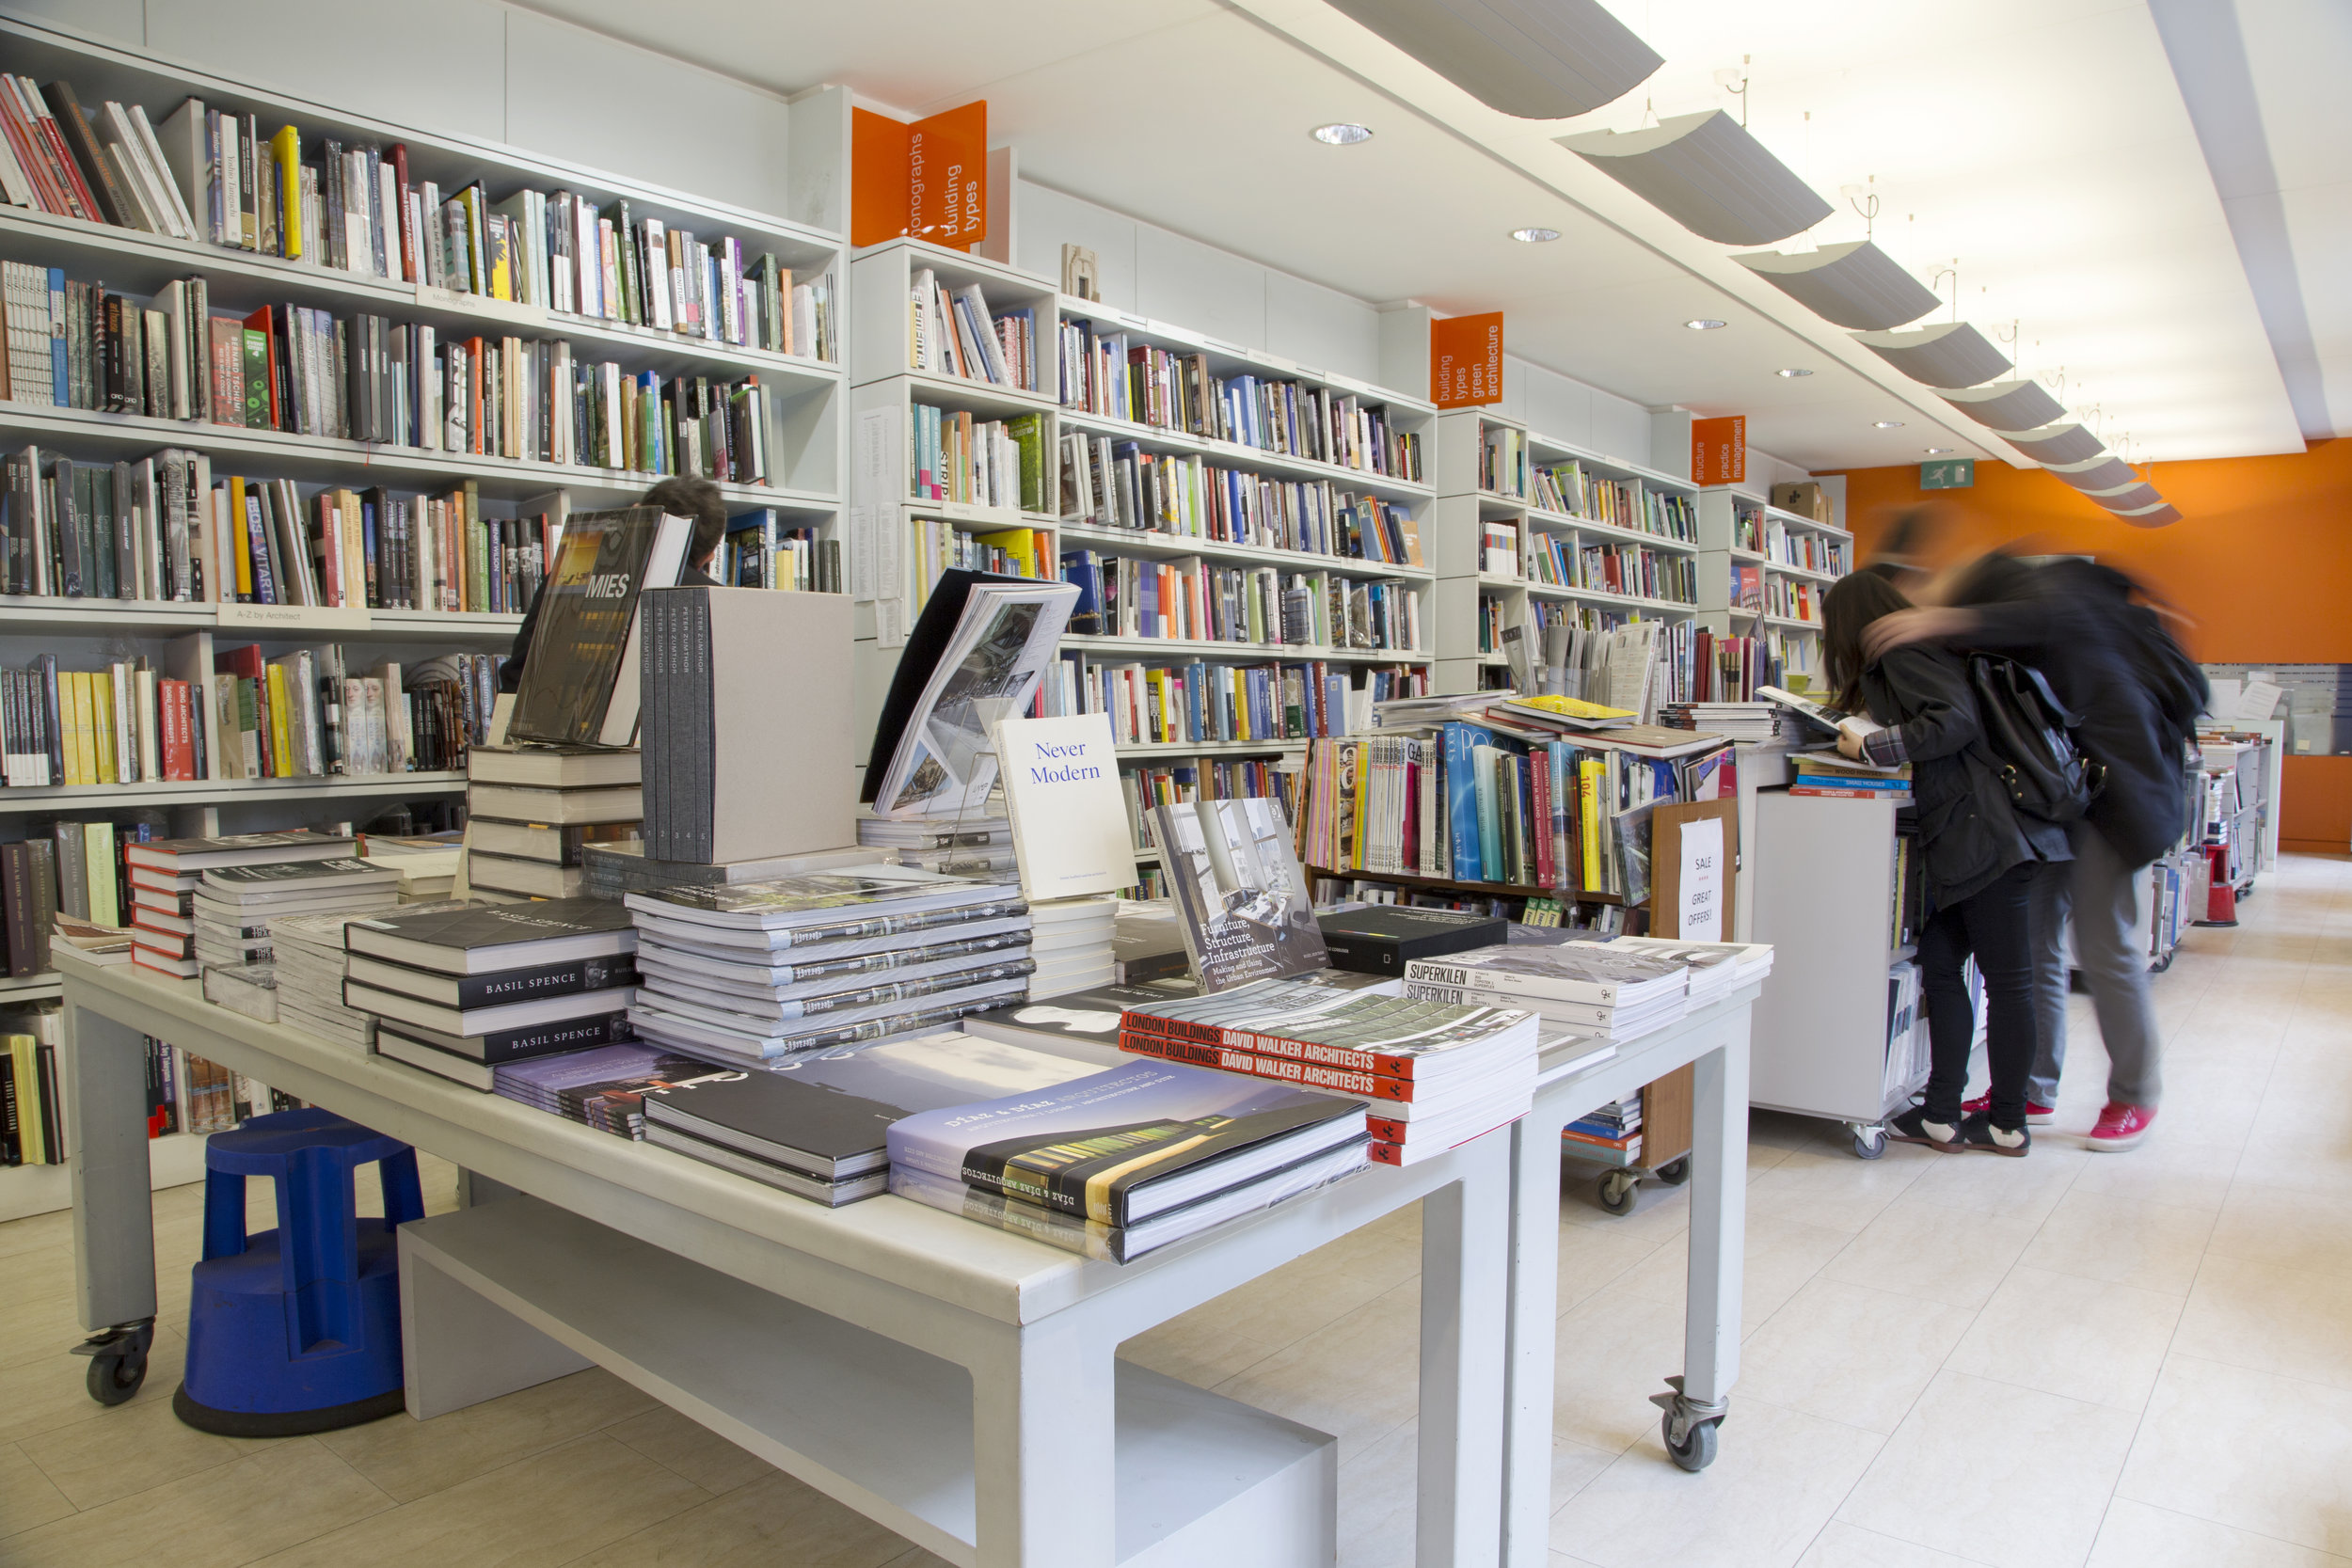  RIBA Bookshop Royal Institute of British Architects  66 Portland Place  The RIBA Bookshop is located at the Head Quarters of the Royal Institute of British Architects and is Europe’s leading specialist architectural bookshop supplying books, forms, 